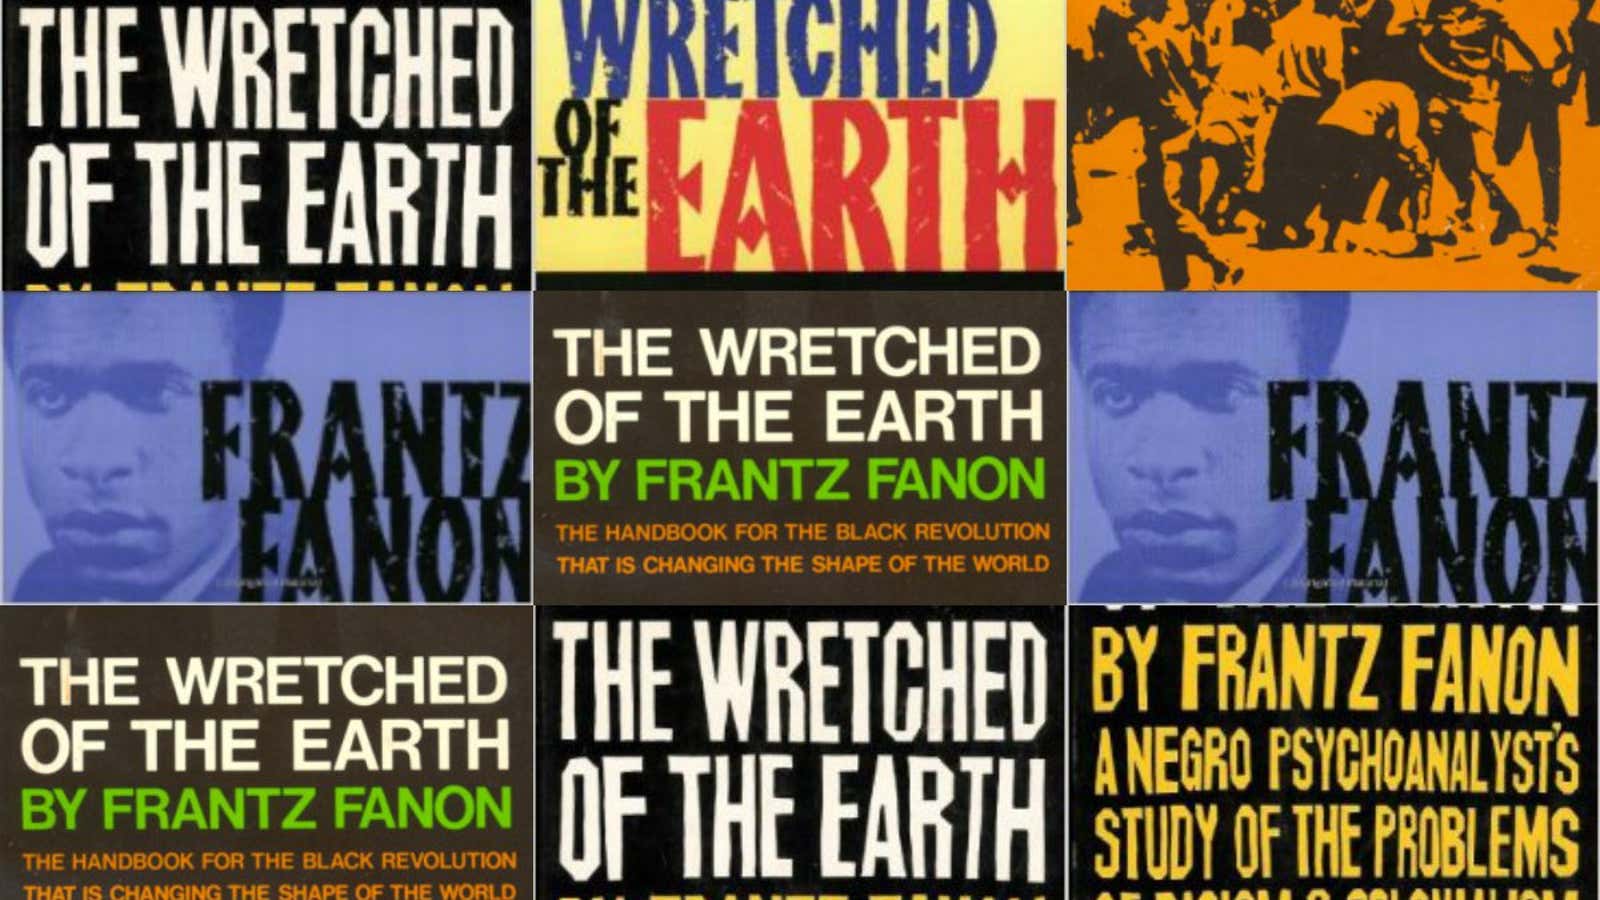 Fanon’s seminal work ‘The Wretched of the Earth’ was hugely influential.